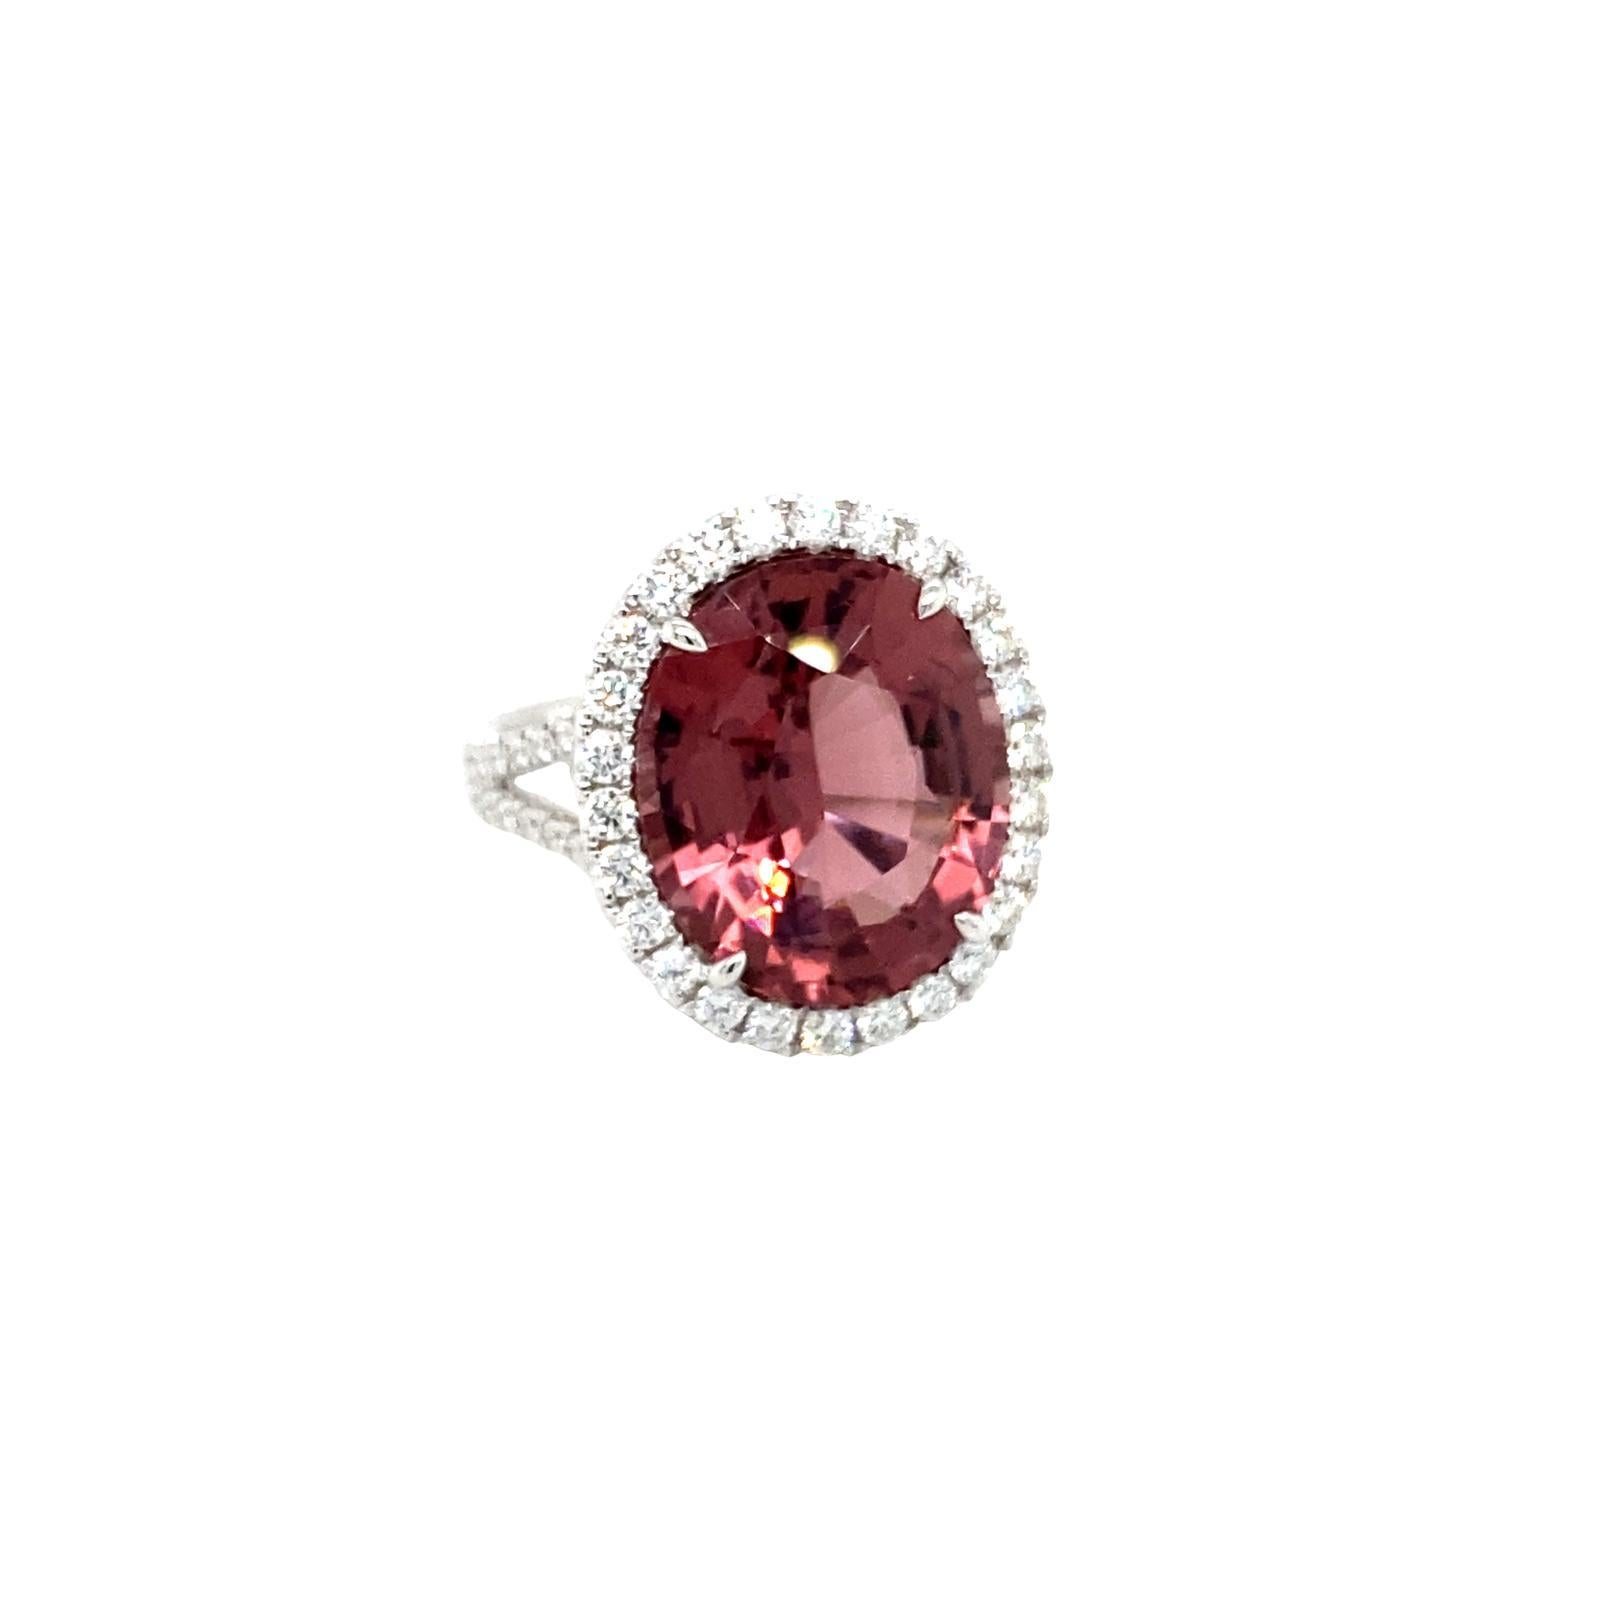 GIA Certified Oval Pink Tourmaline weighing 9.89 carats
Measuring (15.88x13.16x7.87) mm
70 Pieces of round diamonds weighing .96 carats
Diamonds are GH-Si1
Set in 18 karat white gold ring
7.00 grams